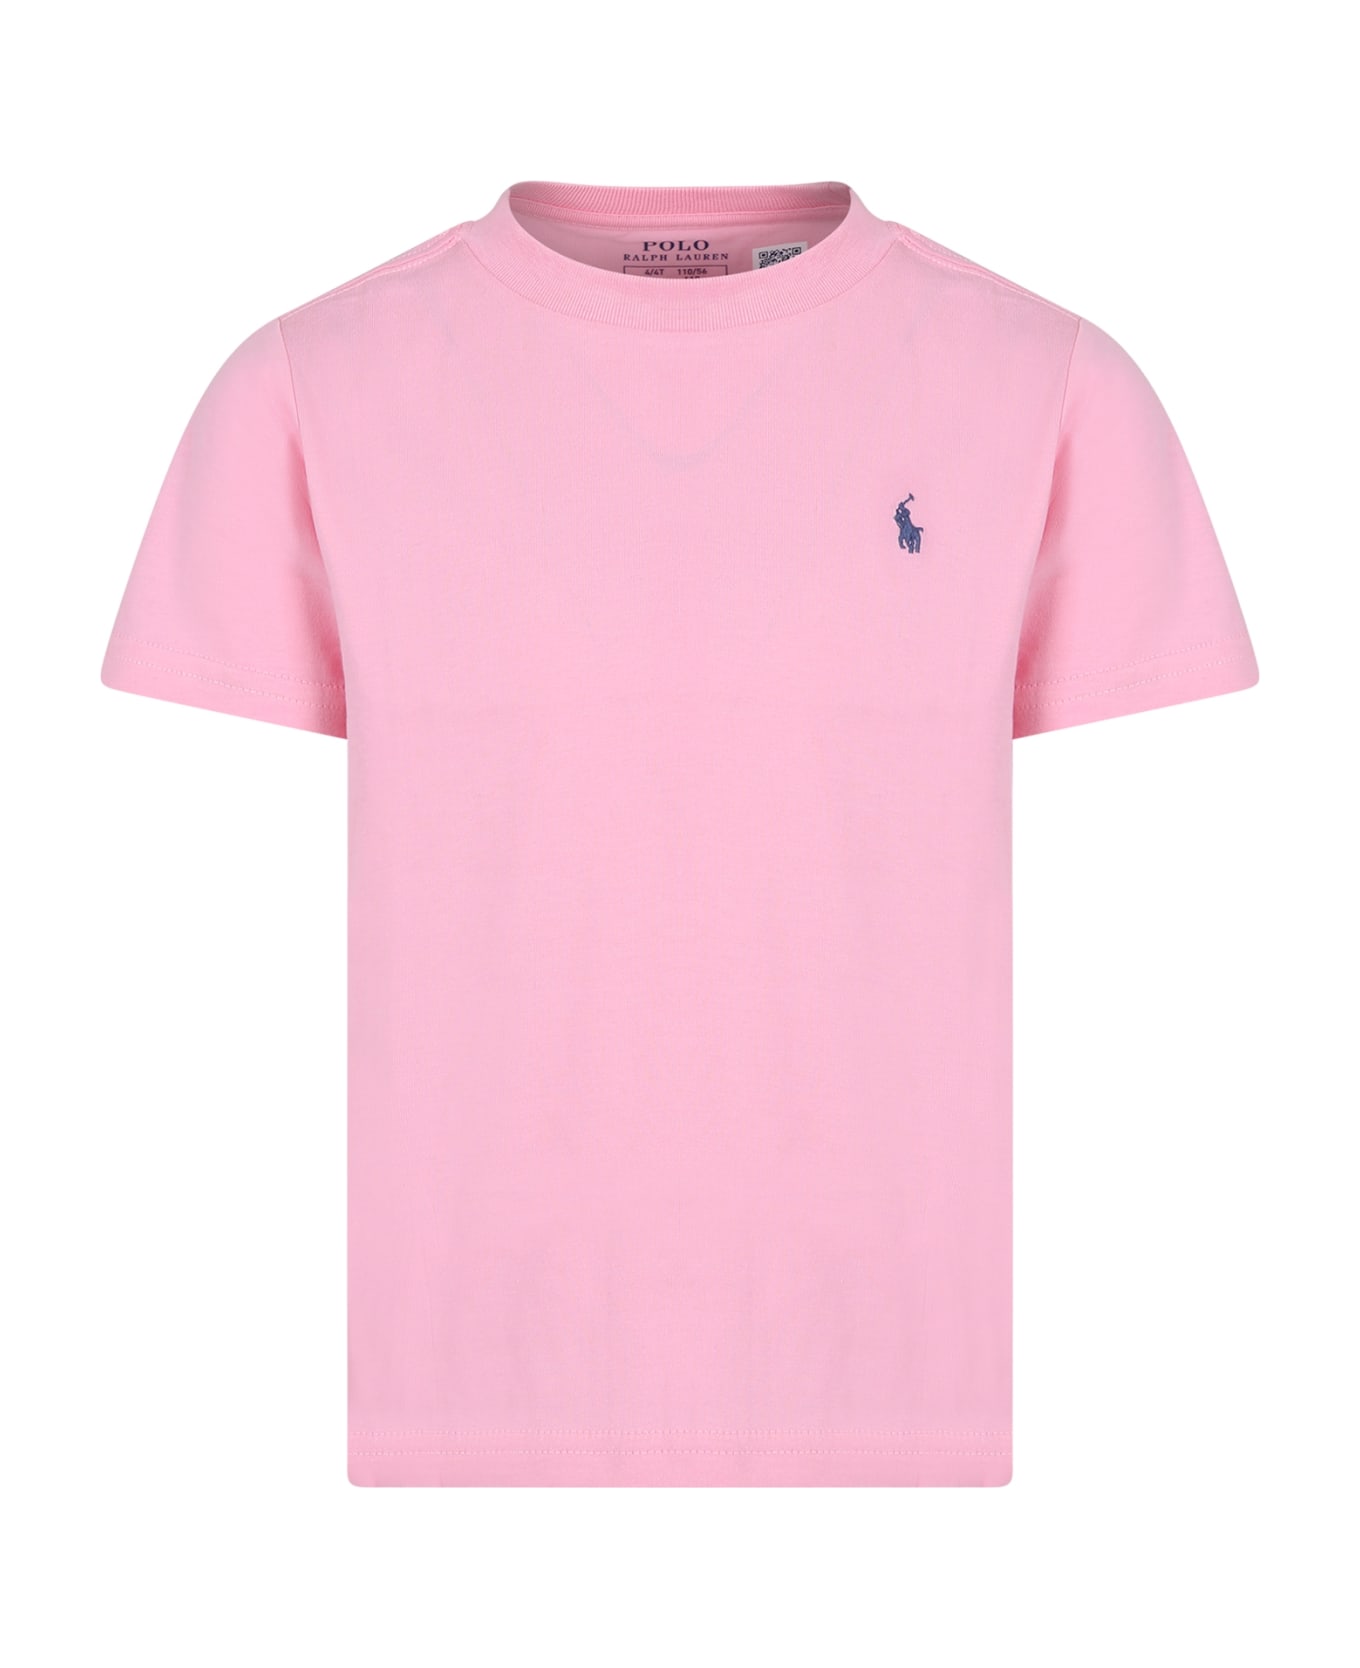 Ralph Lauren Pink T-shirt For Girl With Pony - Pink